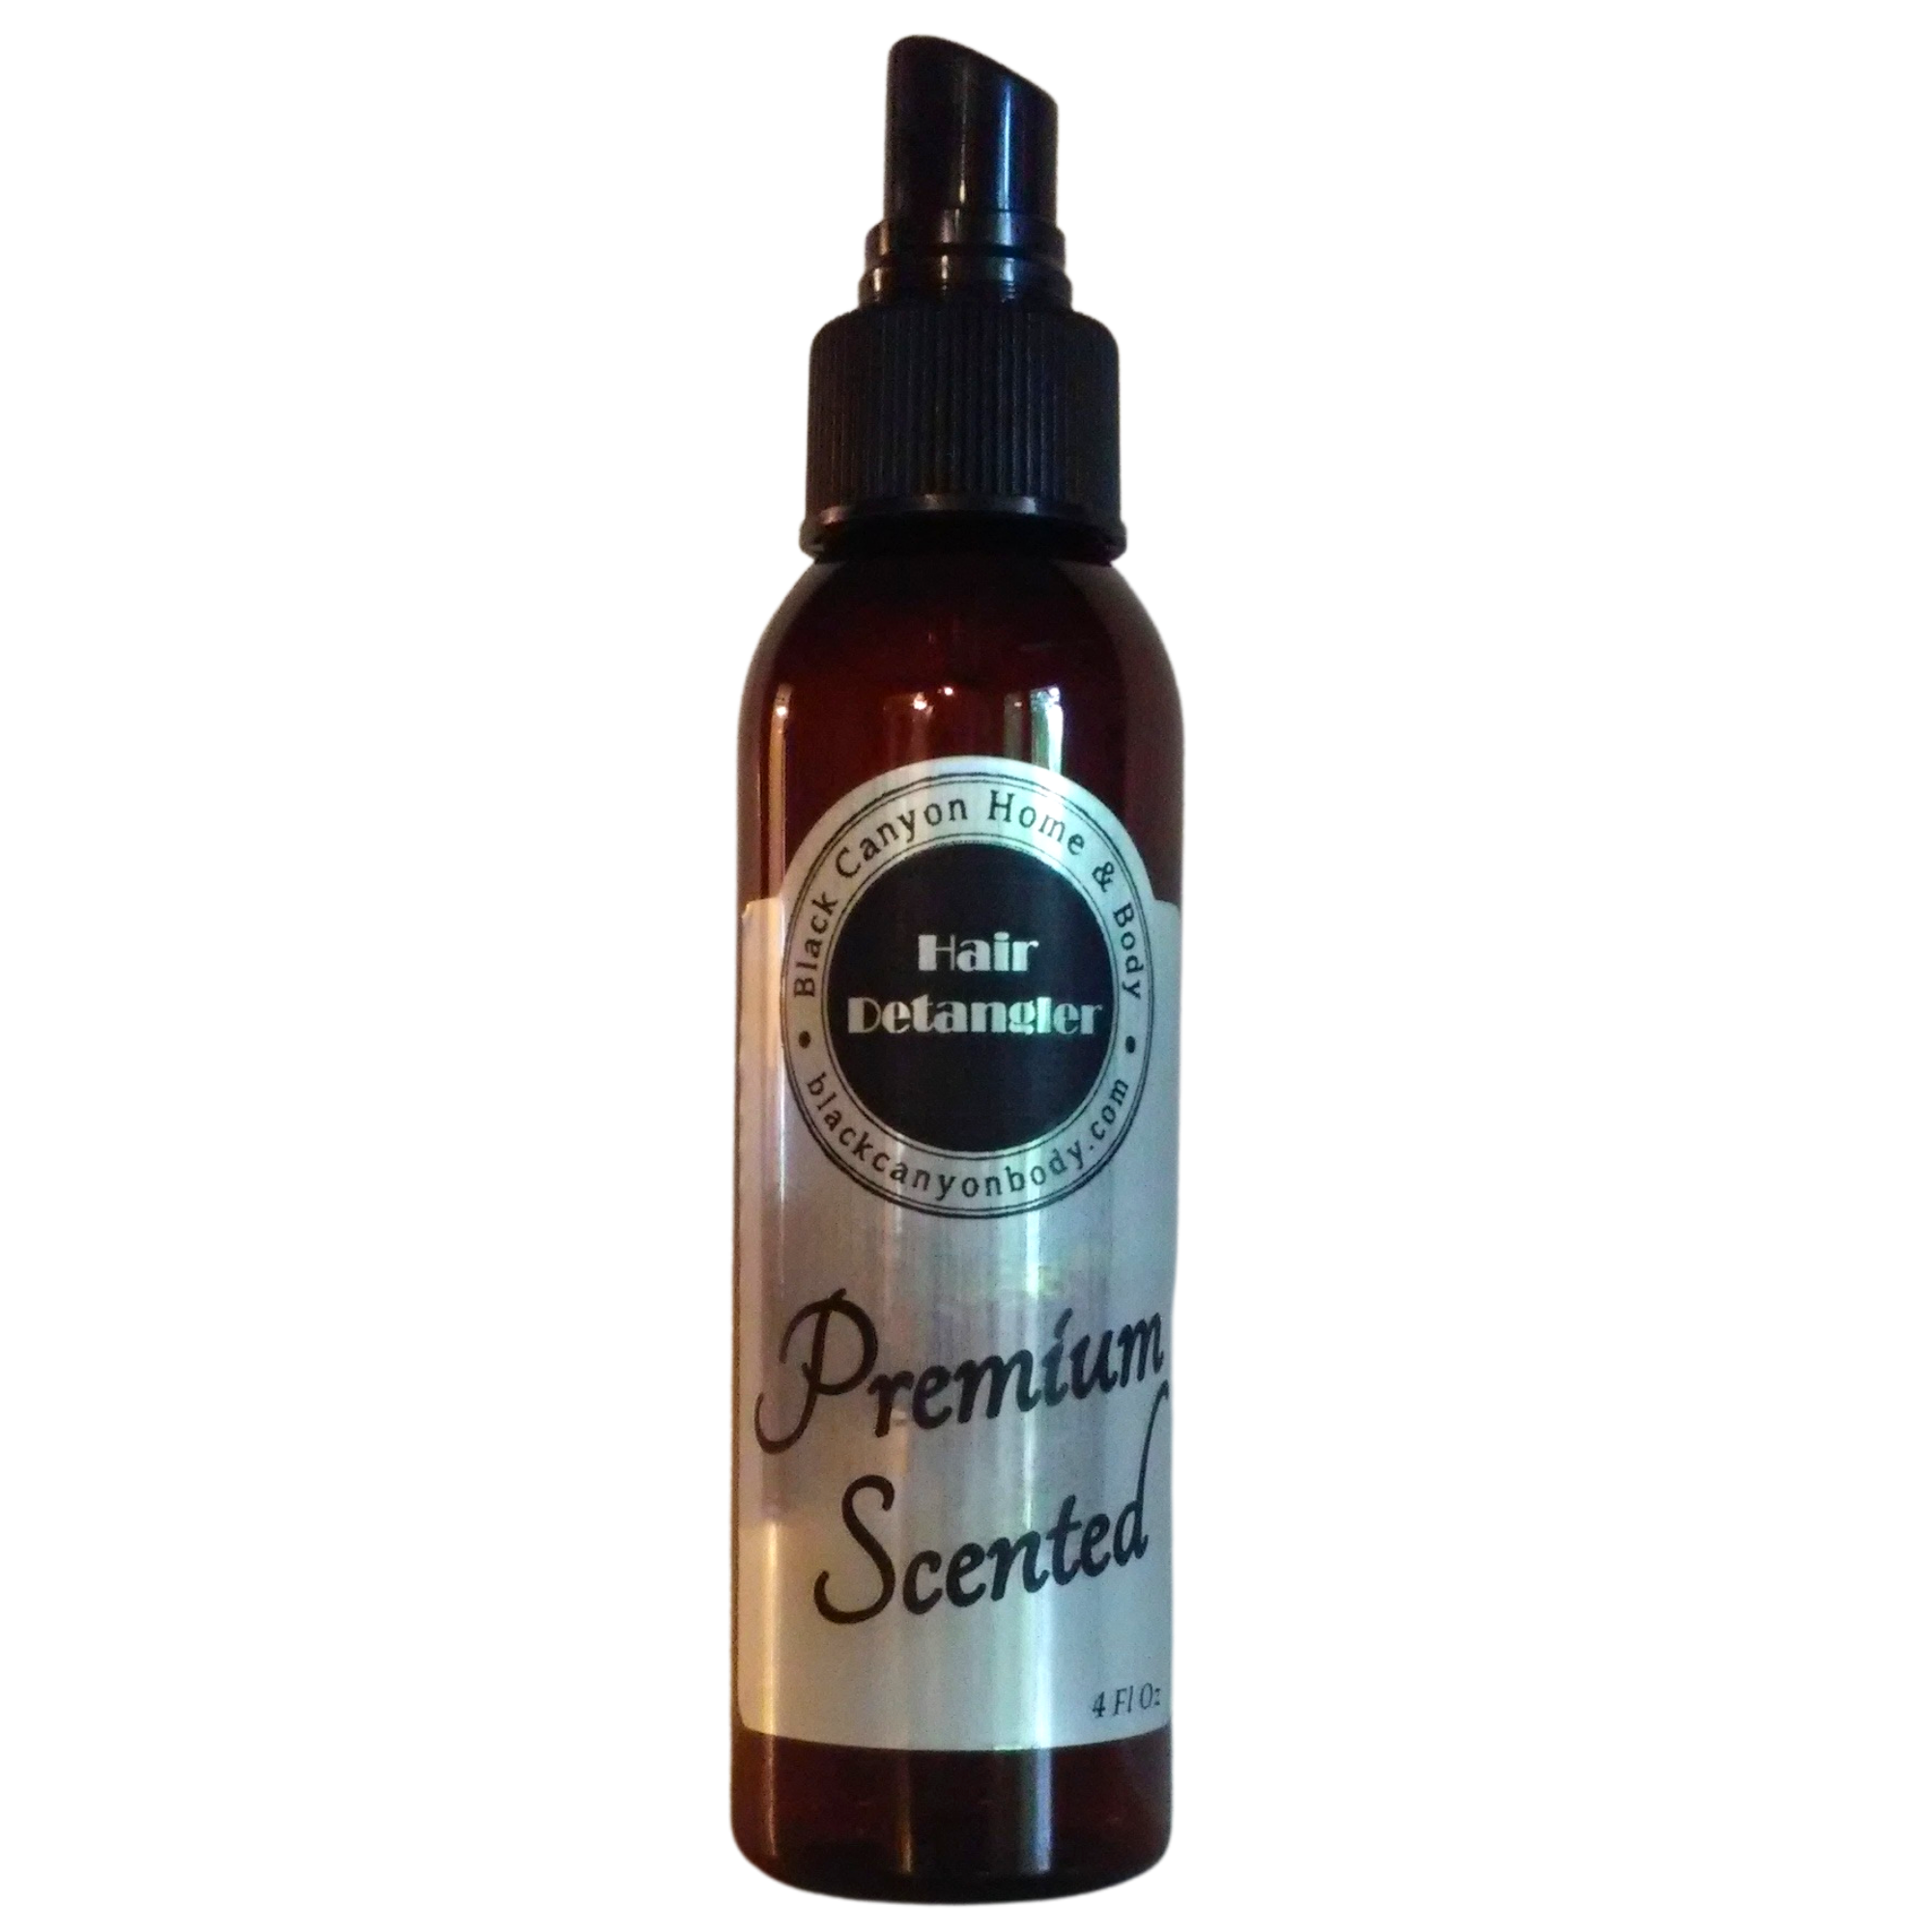 Black Canyon Wild Cherry Vanilla Scented Hair Detangler Spray with Olive Oil